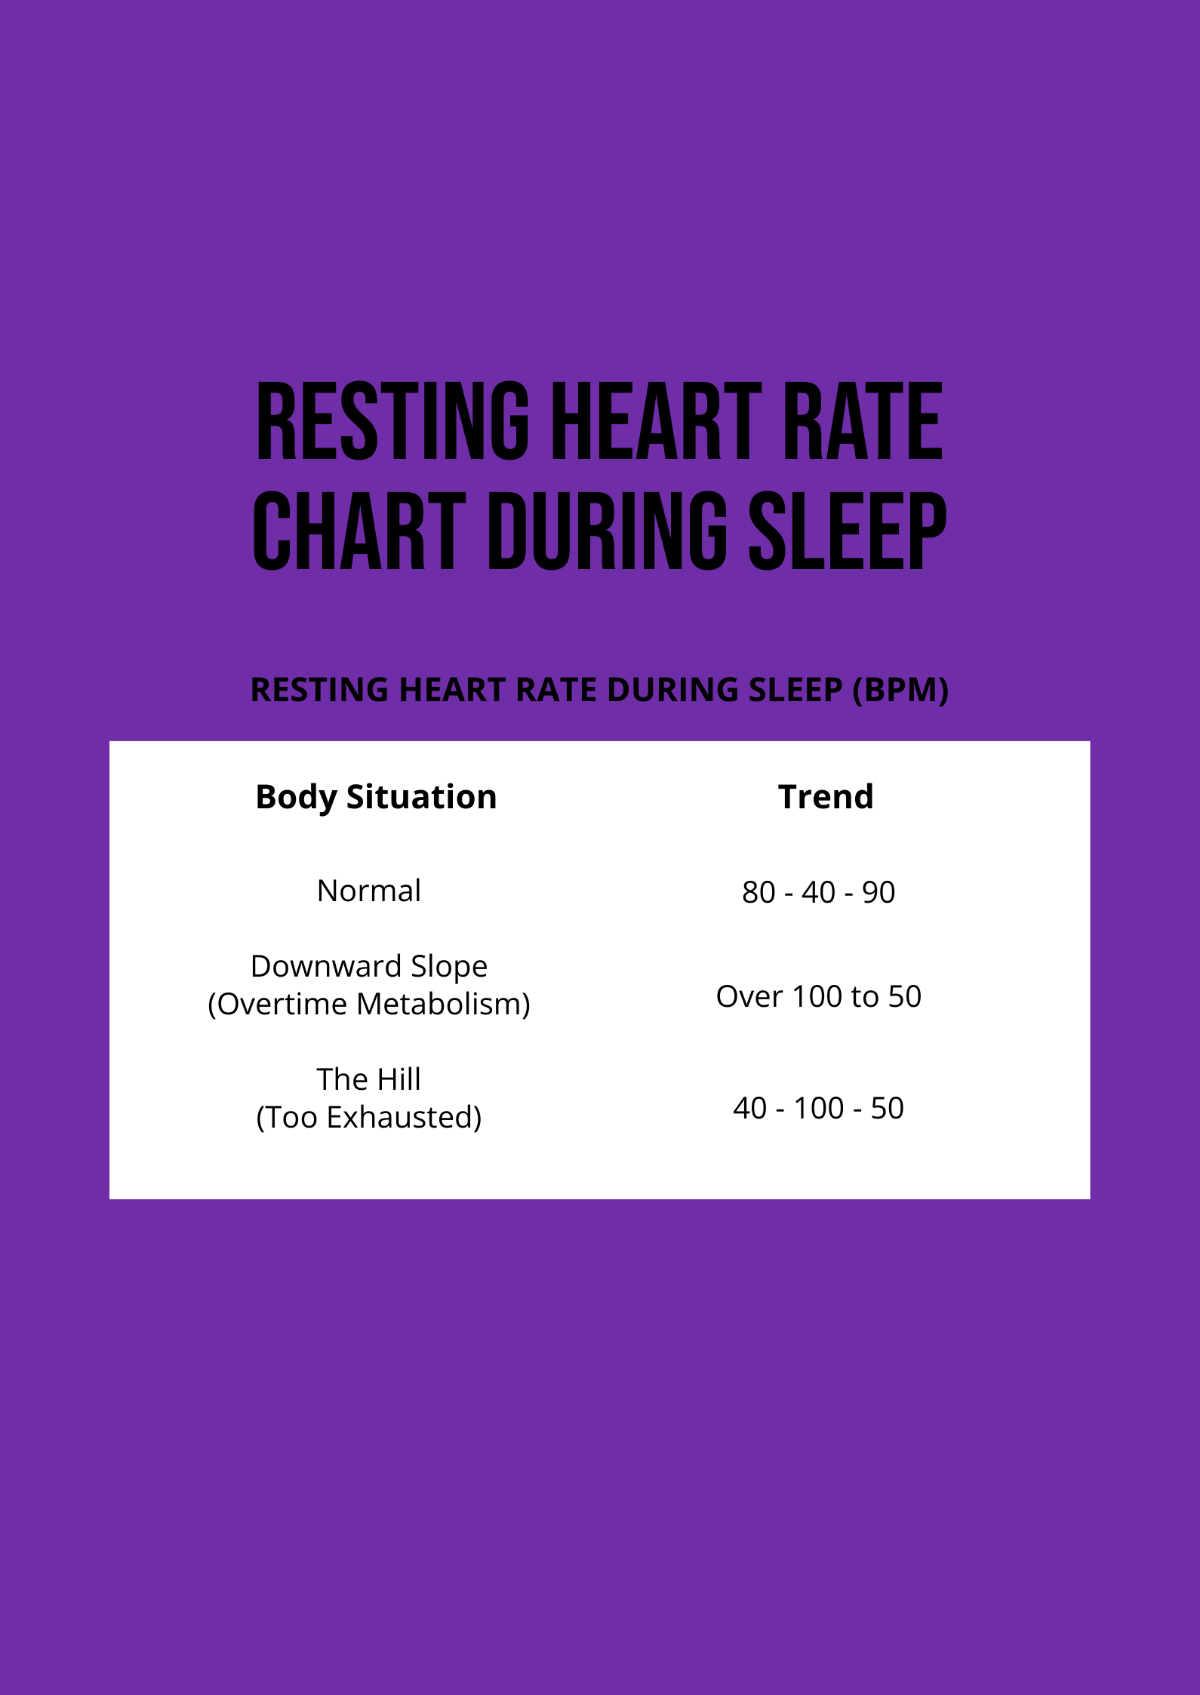 Free Resting Heart Rate Chart During Sleep Template